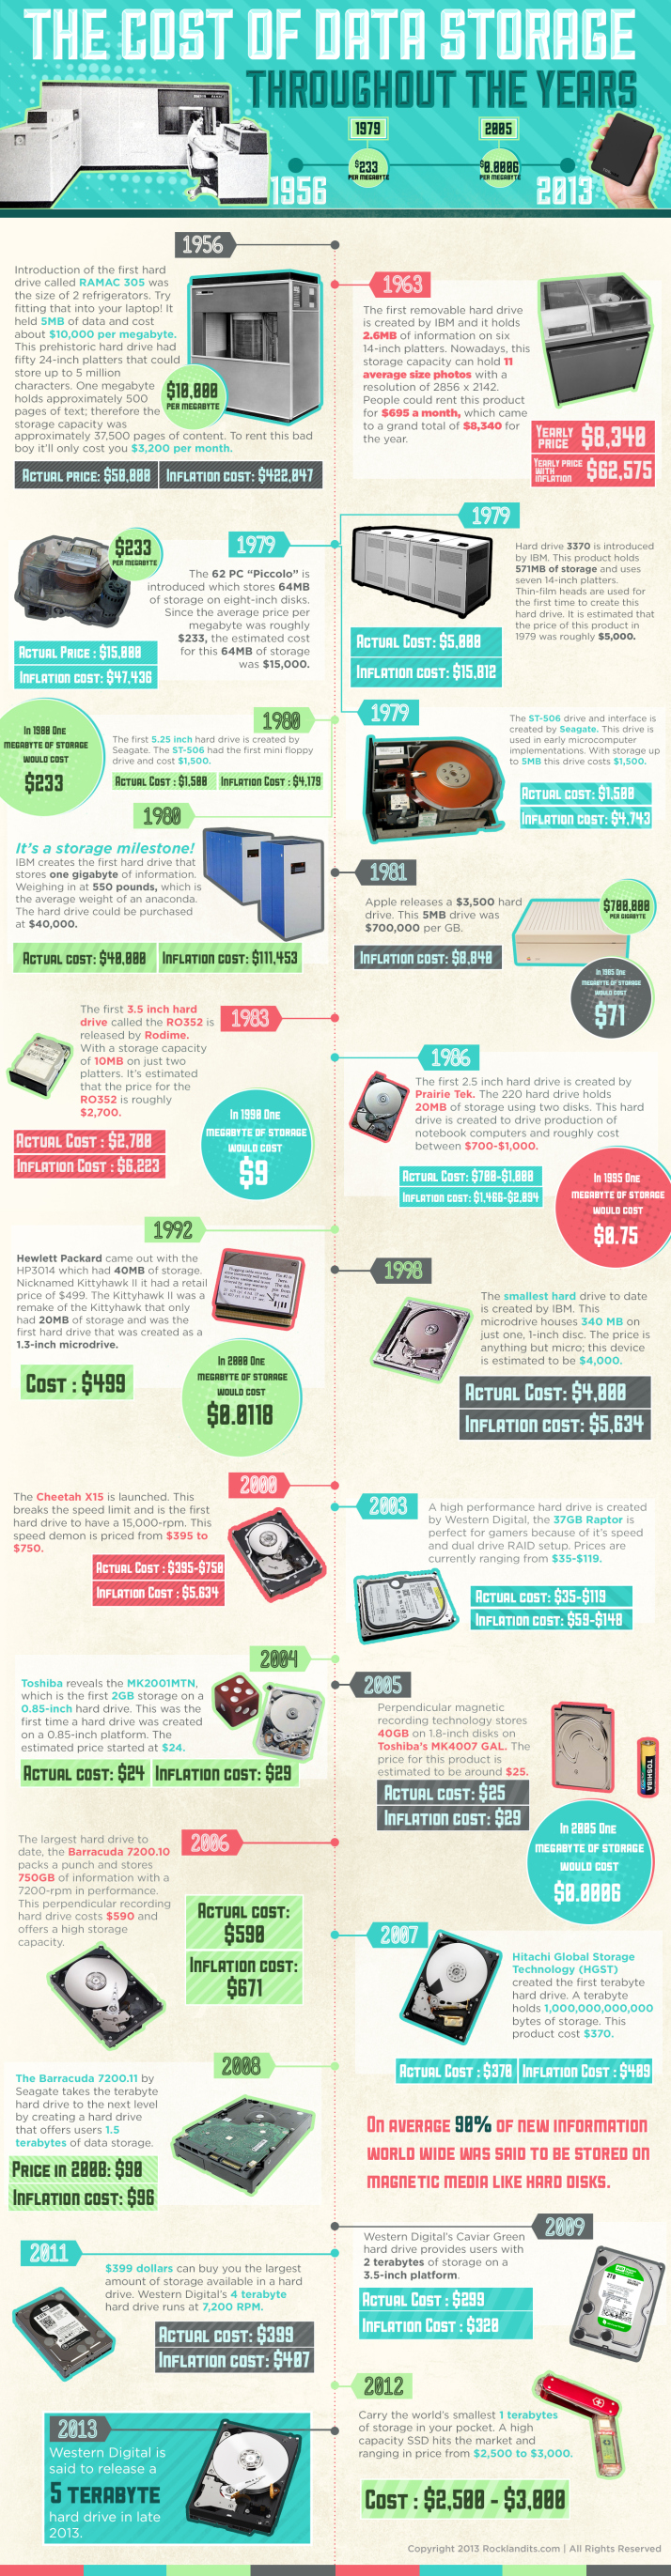 The cost of data storage